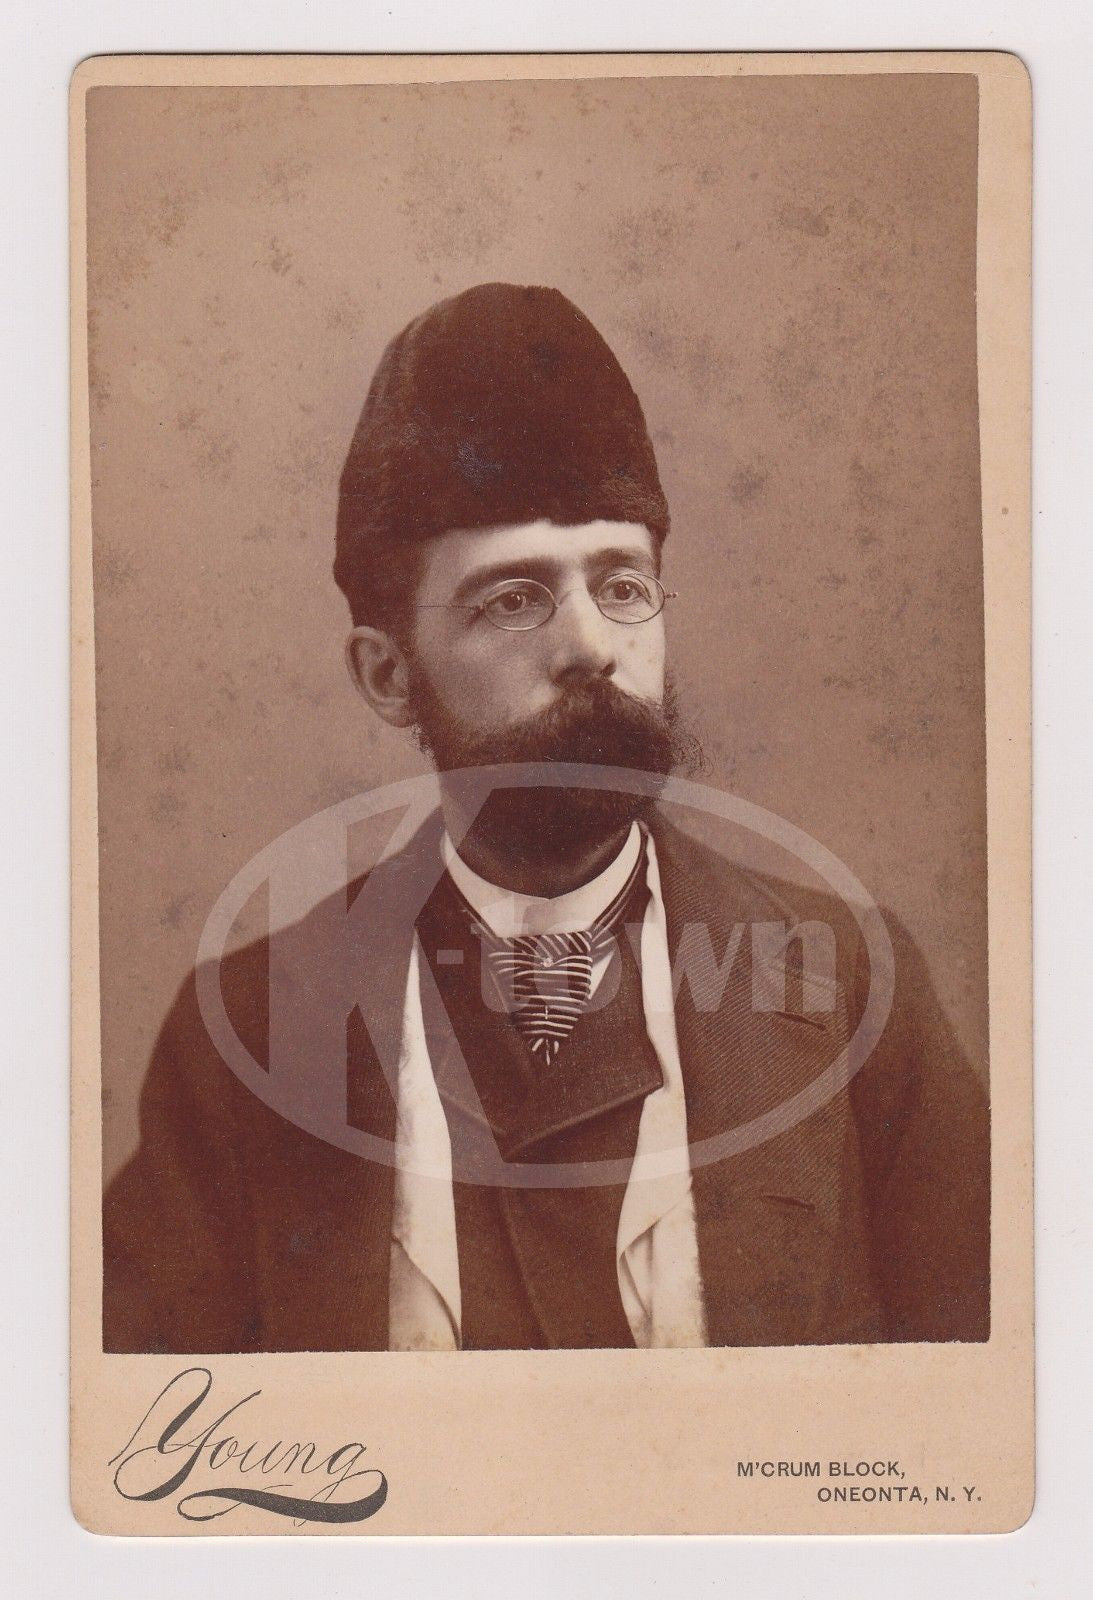 P.R. YOUNG CABINET CARD PHOTOGRAPHER ONEONTA NEW YORK SELF PORTRAIT PHOTOGRAPH - K-townConsignments